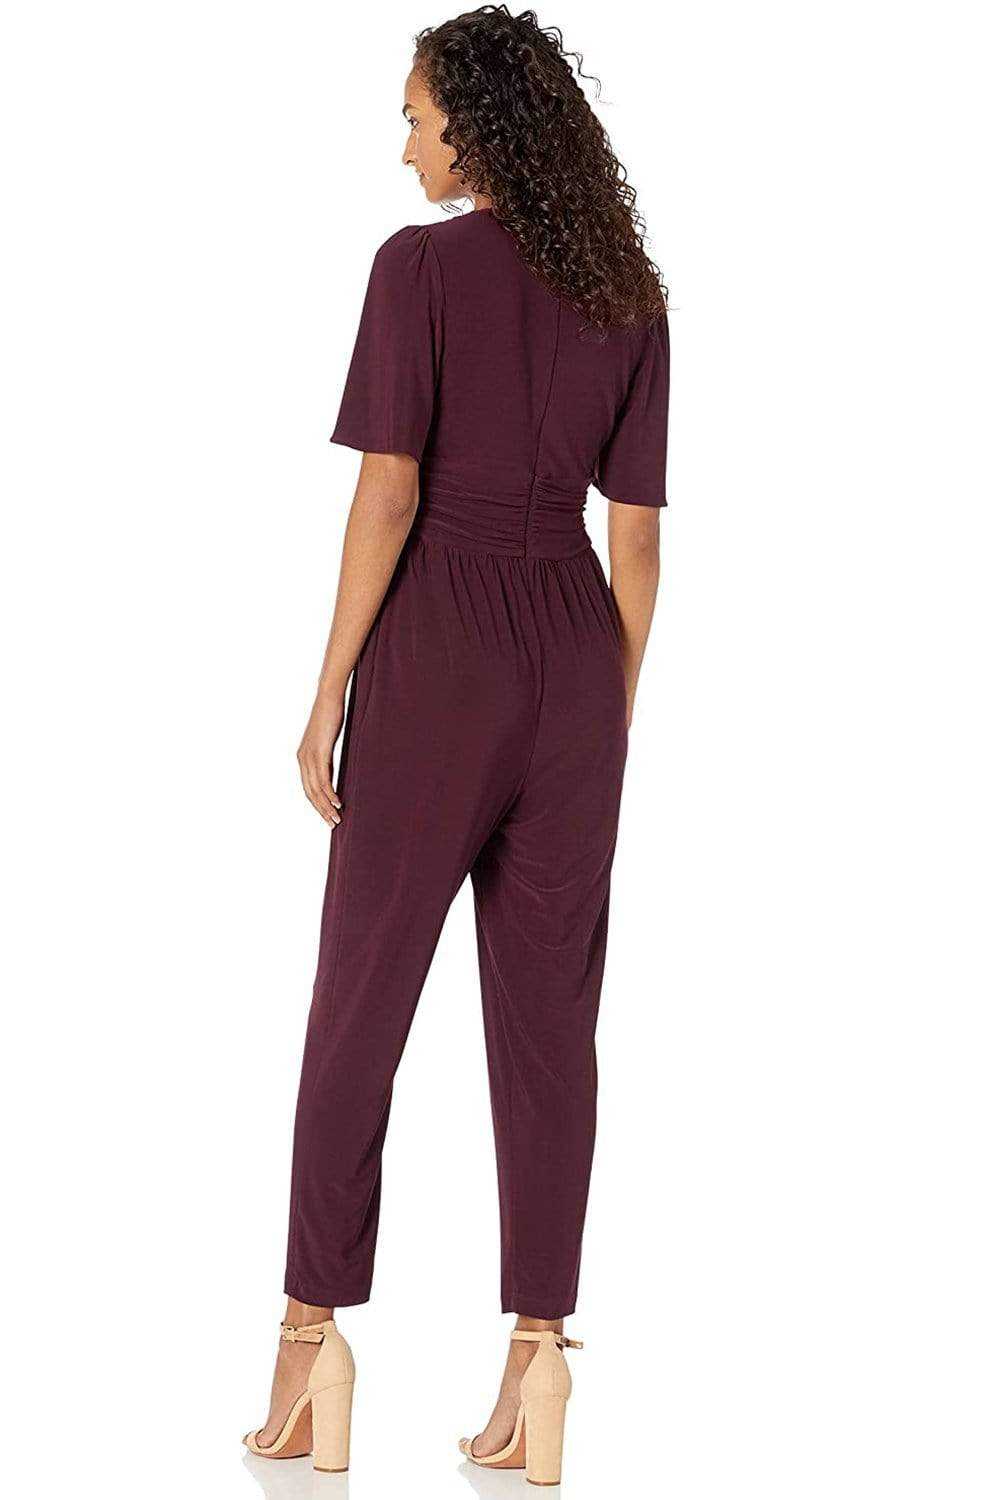 Taylor, Taylor - 1564M Short Sleeve Ruched Tapering Jumpsuit